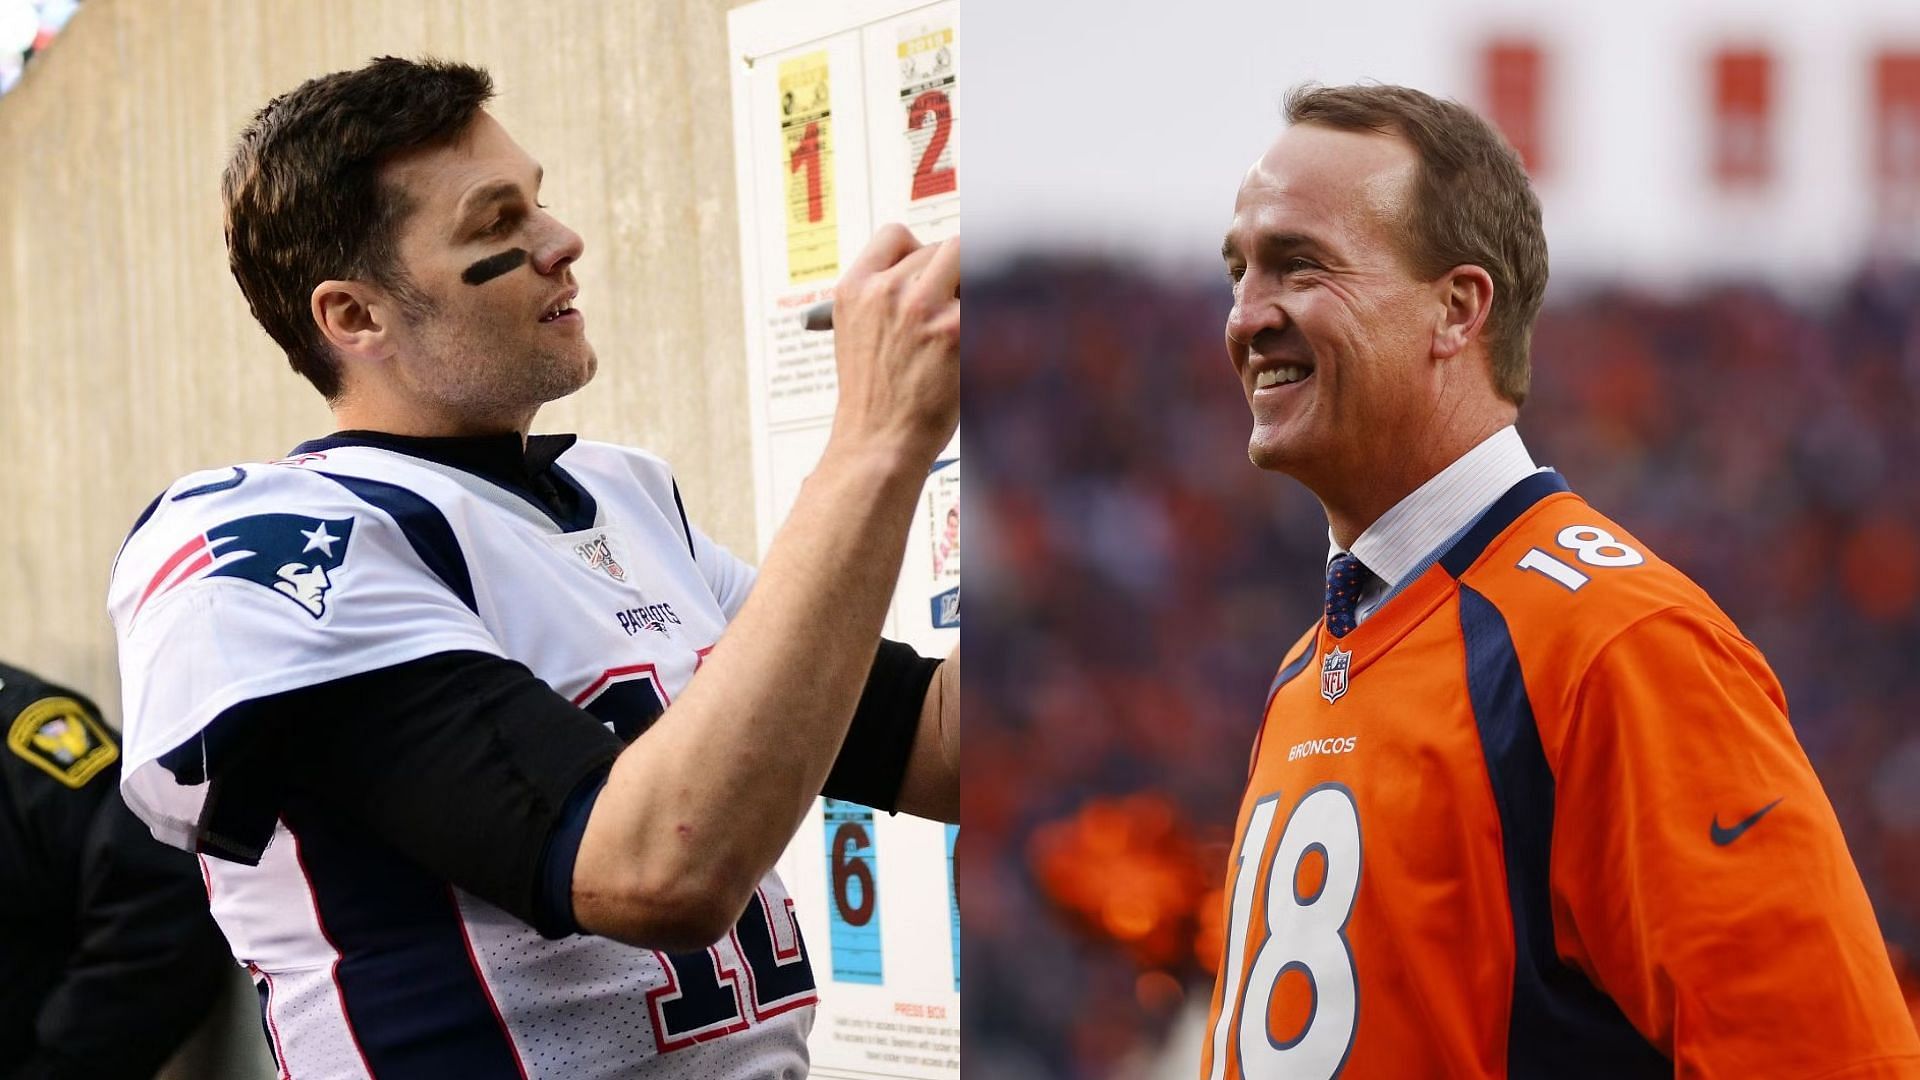 Tom Brady and Peyton Manning bickering over Delta Airlines